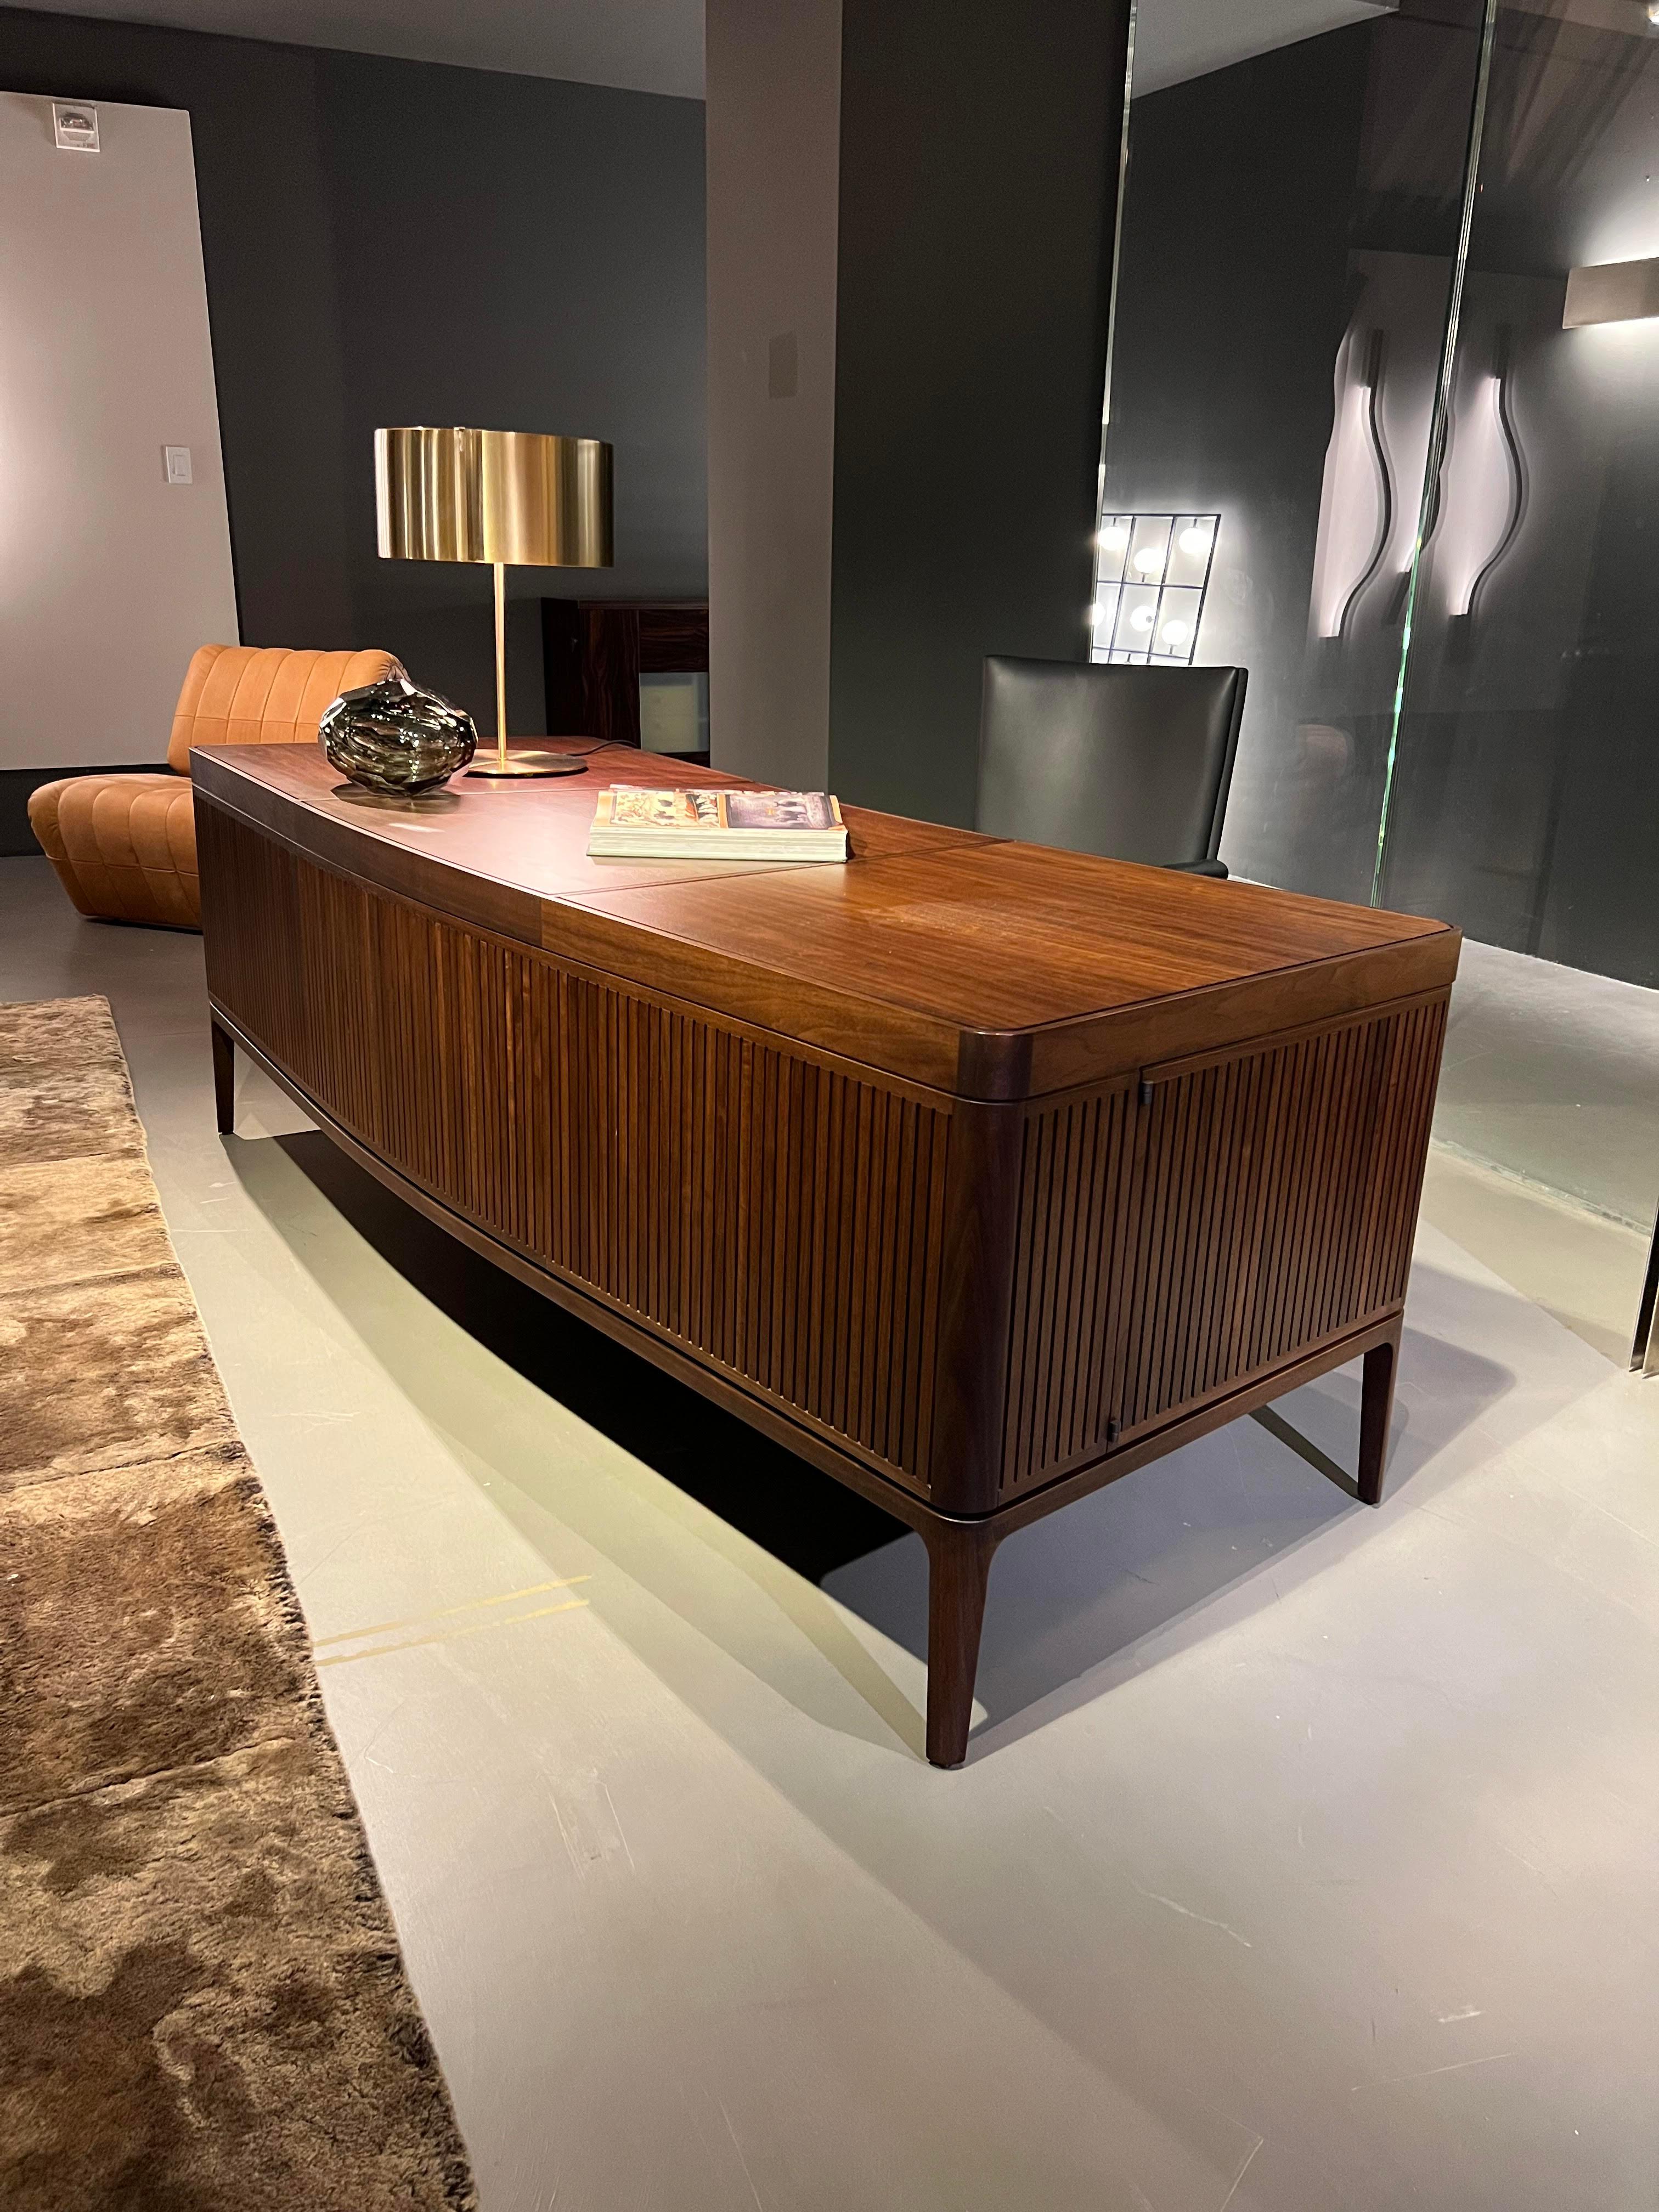 Designed by Roberto Lazzeroni in 2016, Paperweight was created for the Neverfull collection that was started with the sideboards. Executive desk and design object at the same time, it can be placed elegantly at the centre of a living room. The